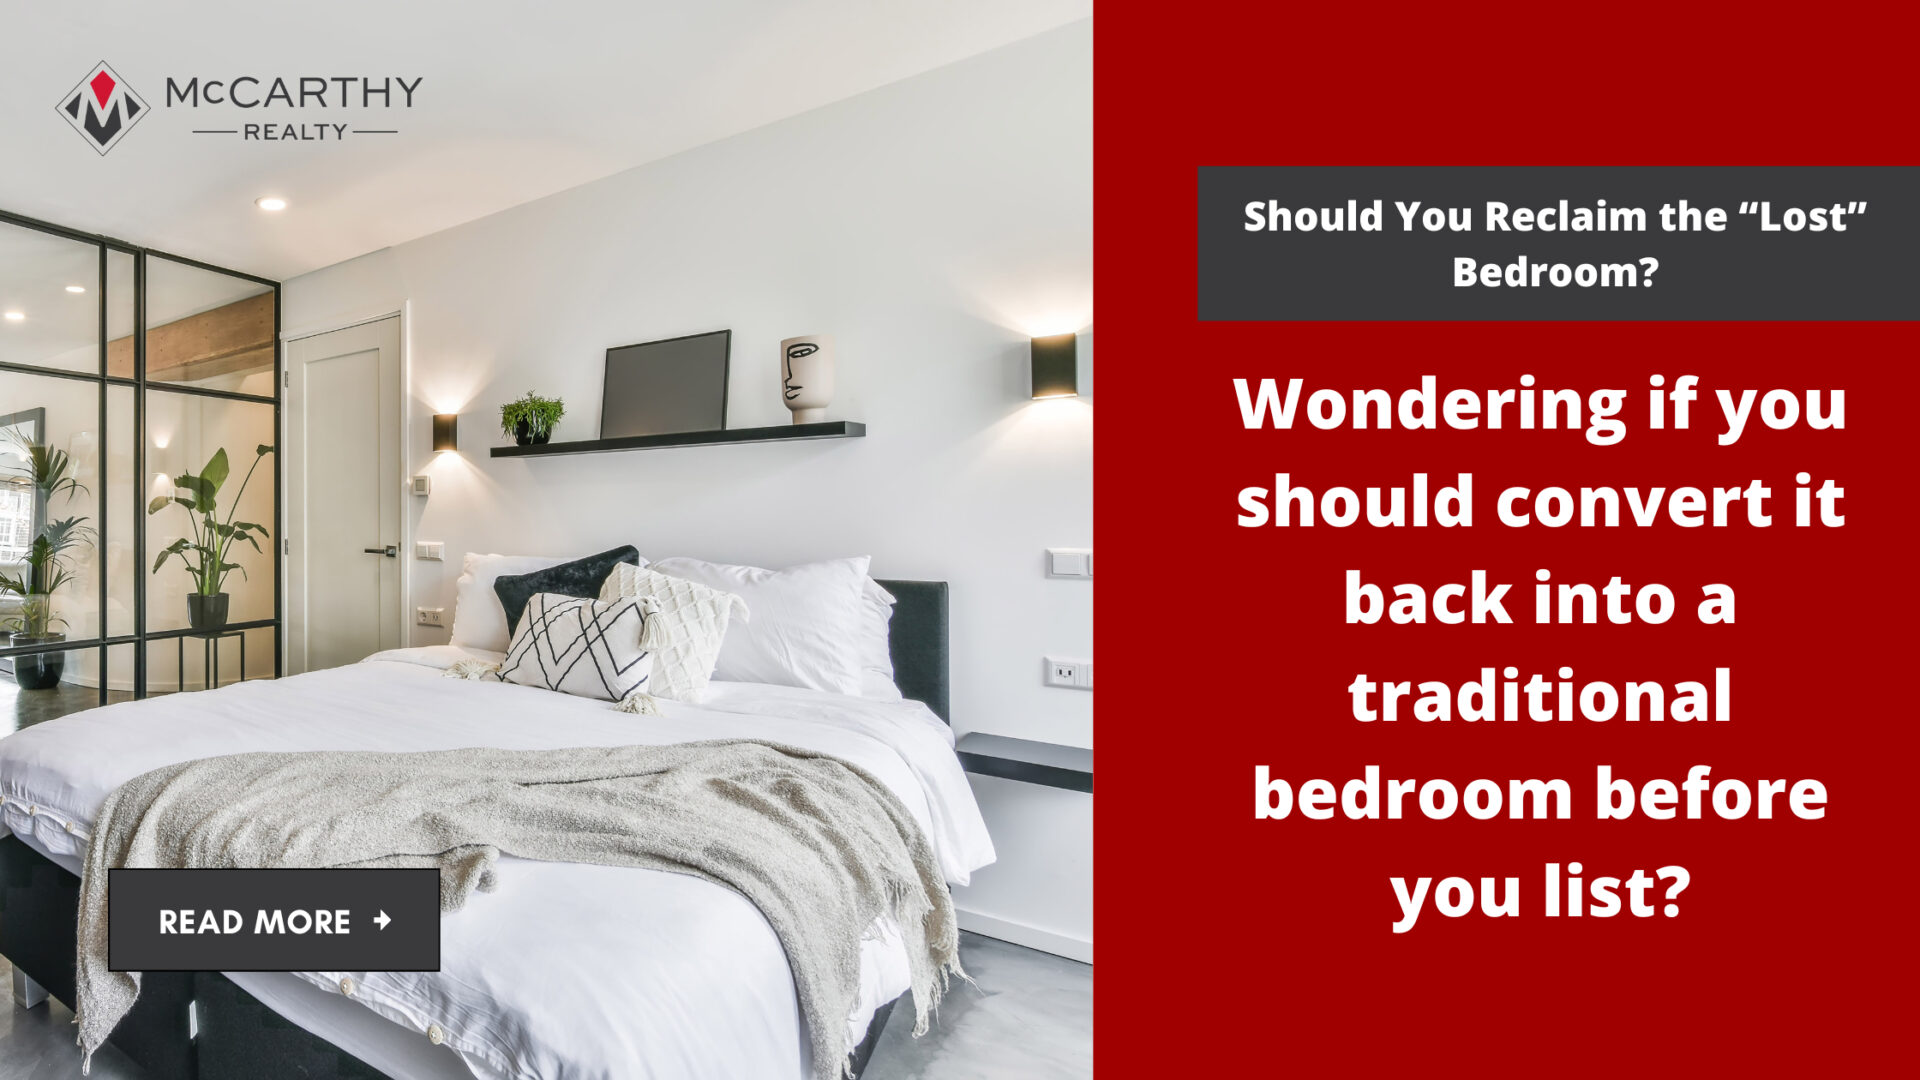 Should You Reclaim the “Lost” Bedroom?